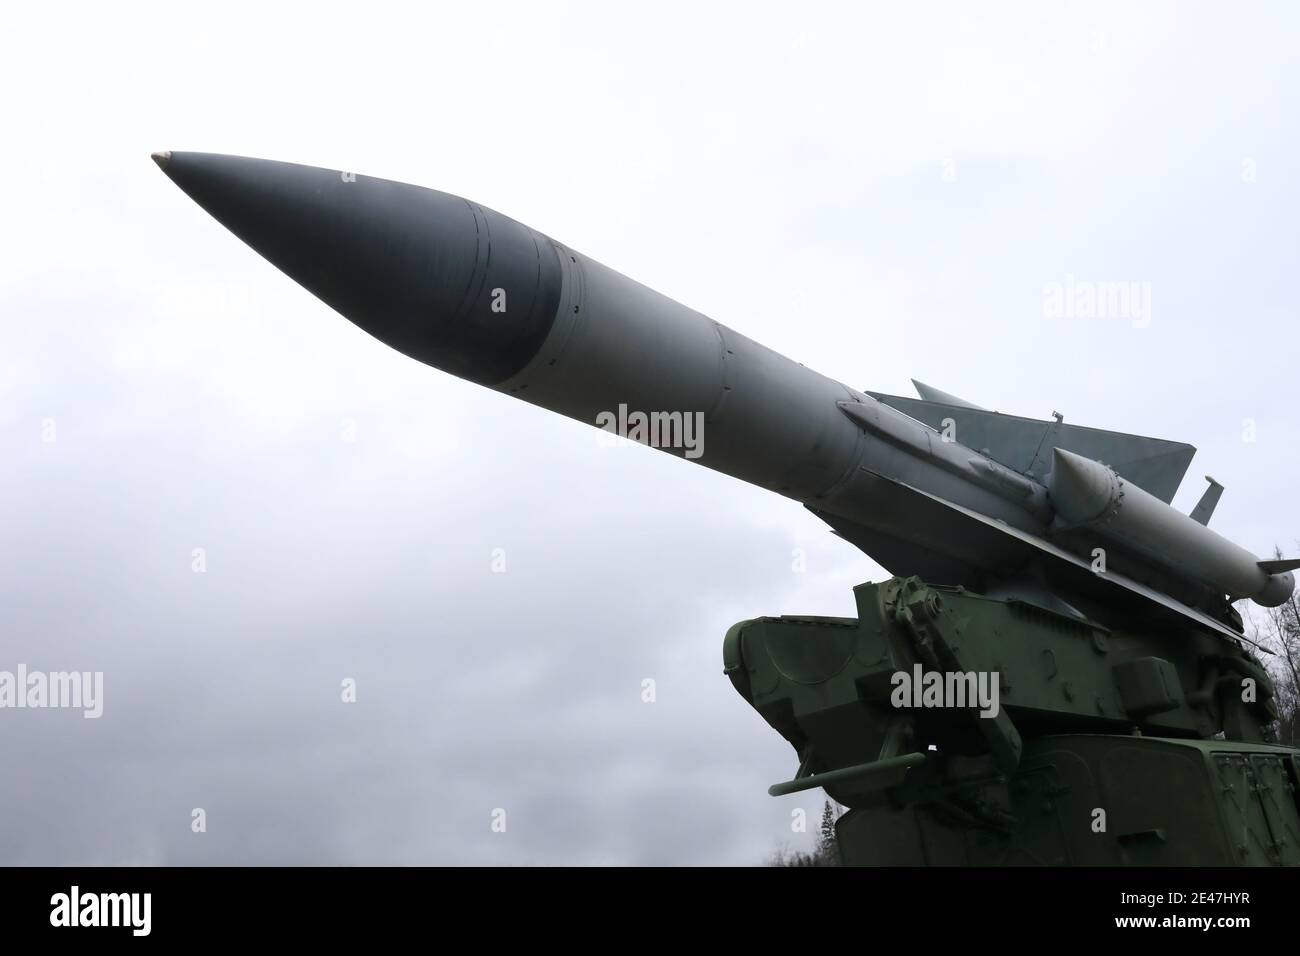 Details of anti-aircraft missile launcher C-200, Russia Stock Photo